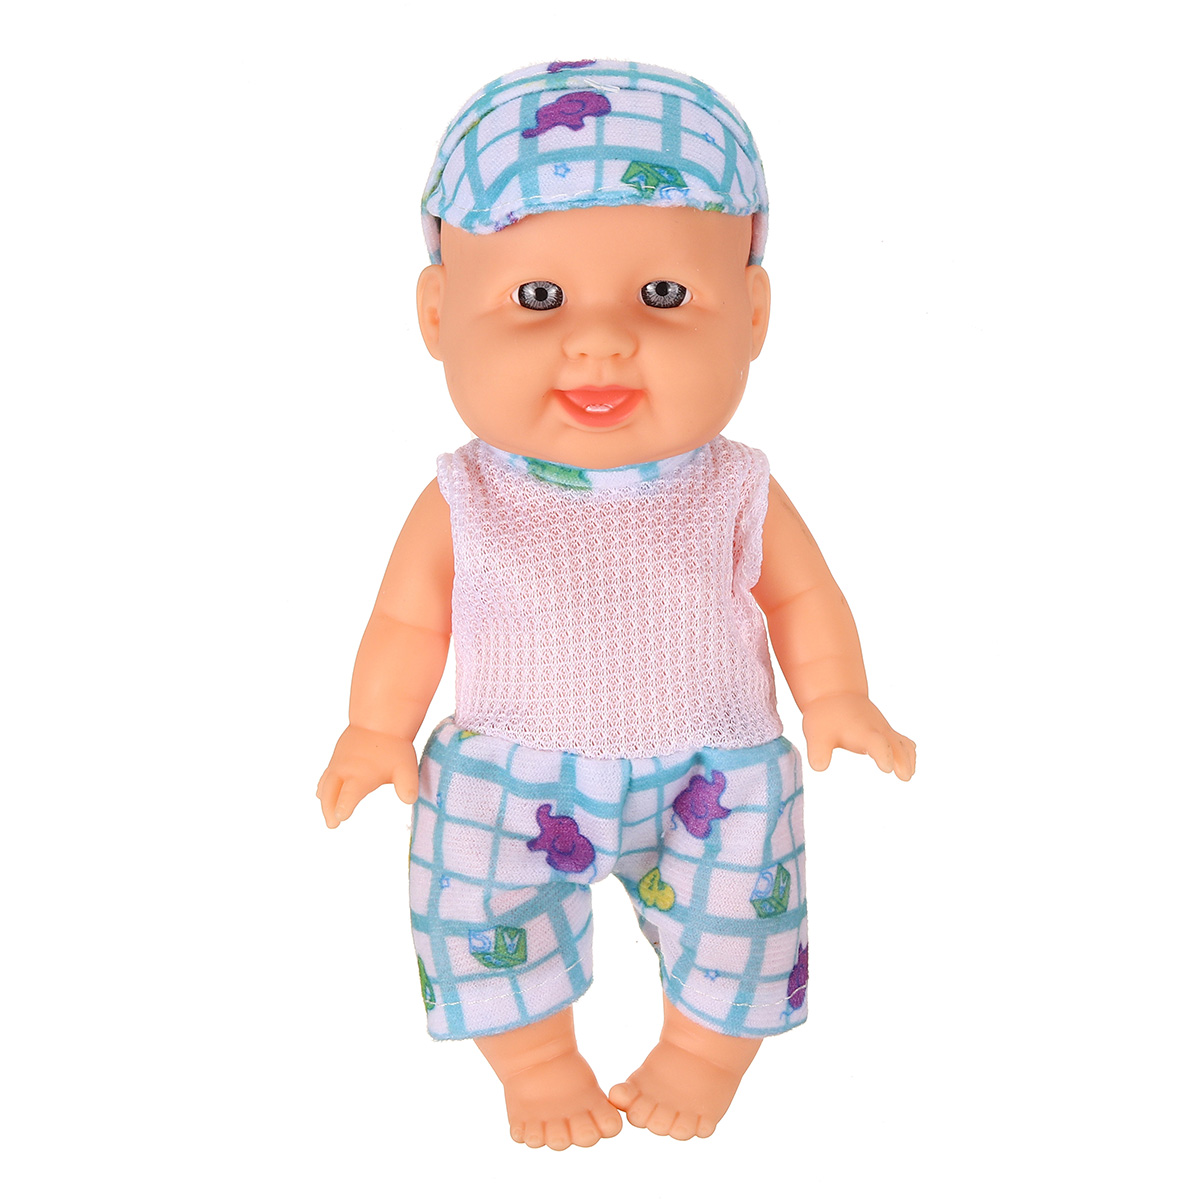 Simulation-Baby-3D-Creative-Cute-Doll-Play-House-Toy-Doll-Vinyl-Doll-Gift-1818655-11